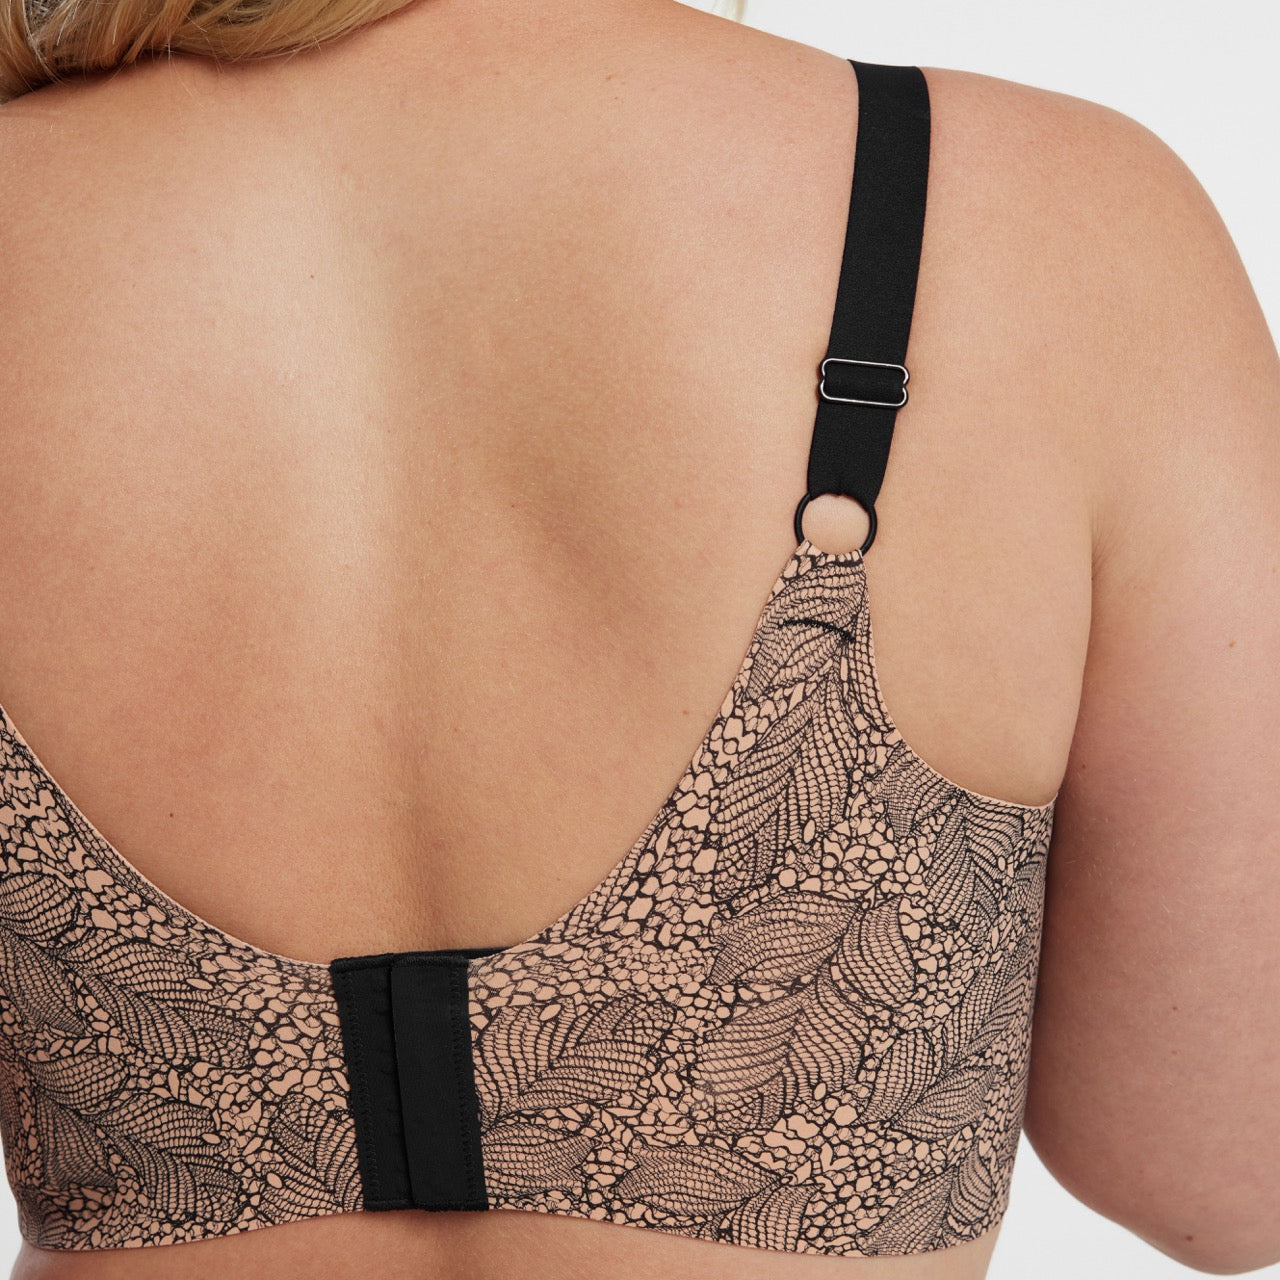 All Color: Black Lace | Adjustable wireless bra with hook and eye in the band